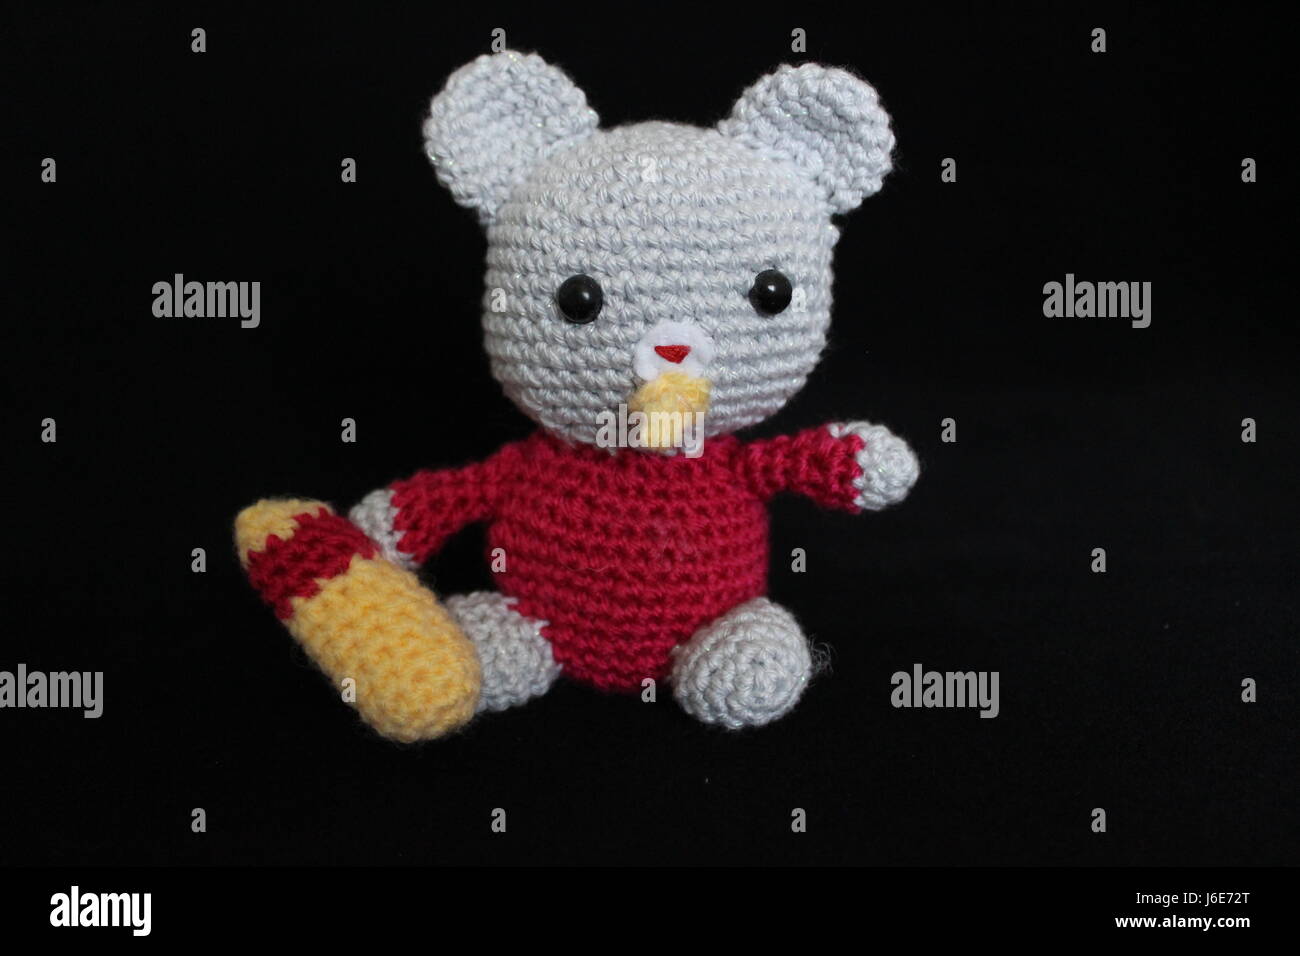 Woolen toy made in crochet and hand on black background Stock Photo